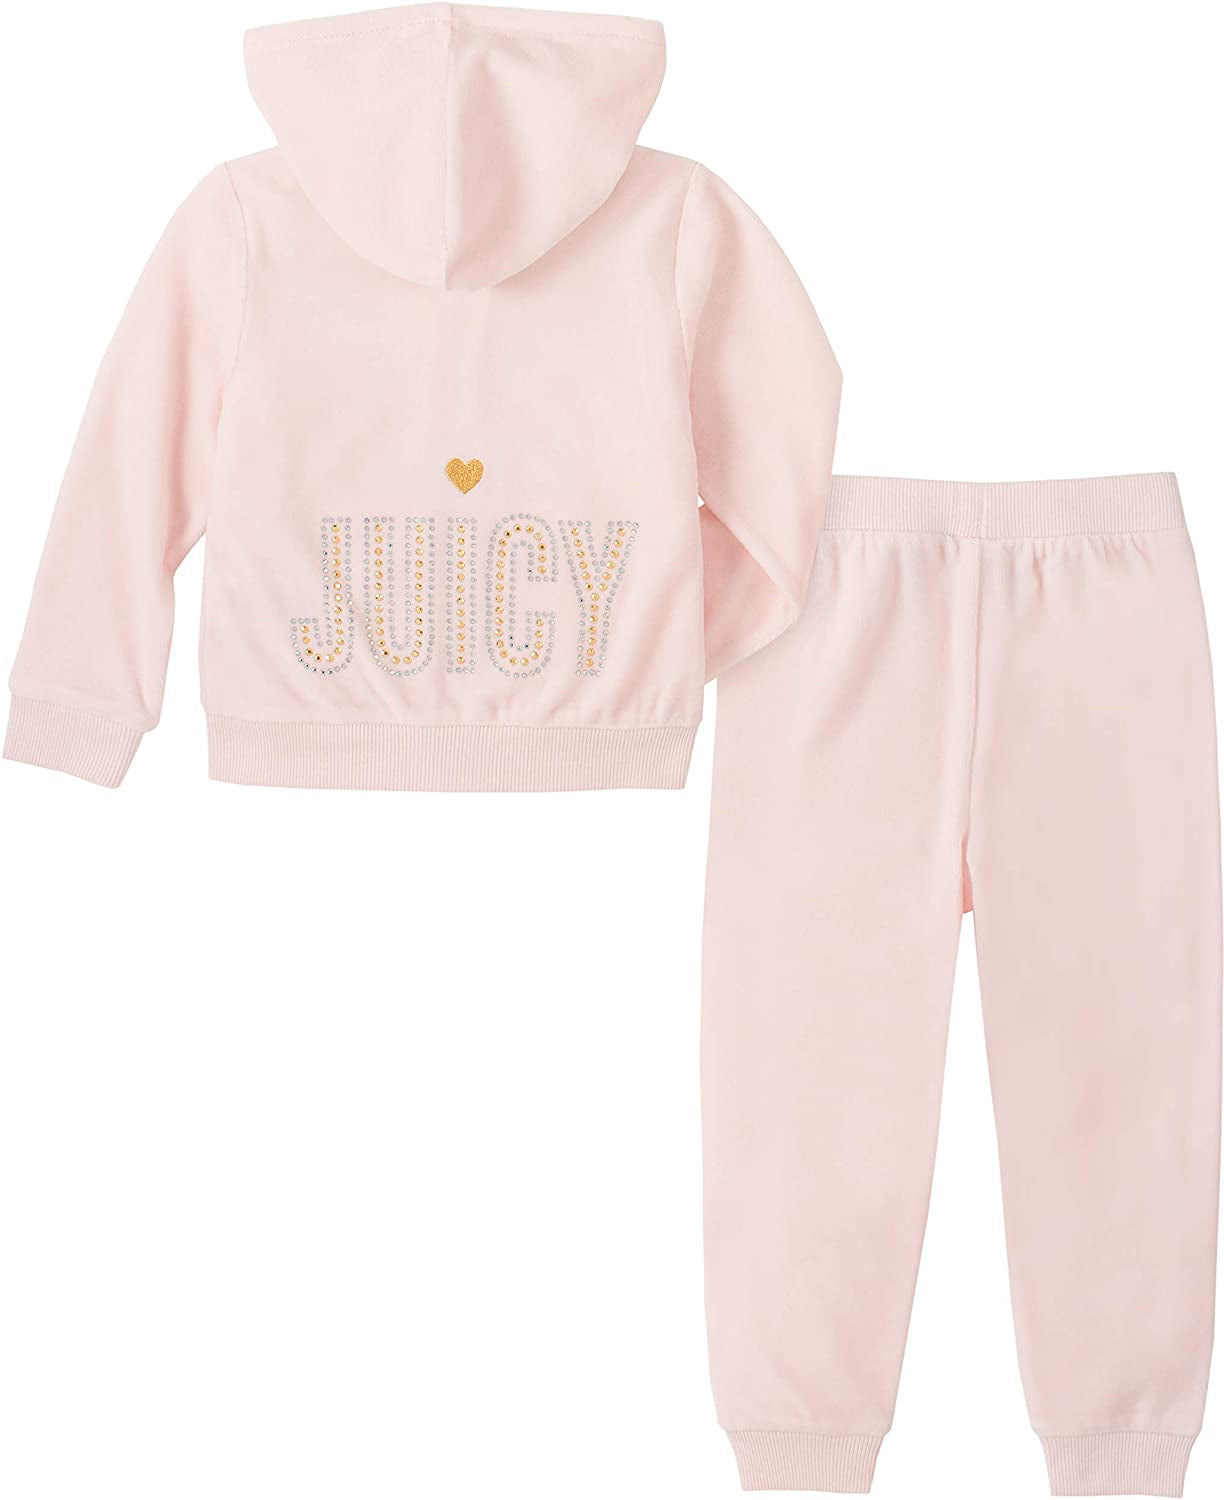 Juicy Couture Girls 12-24 Months Embroidered Velour Jogger Set